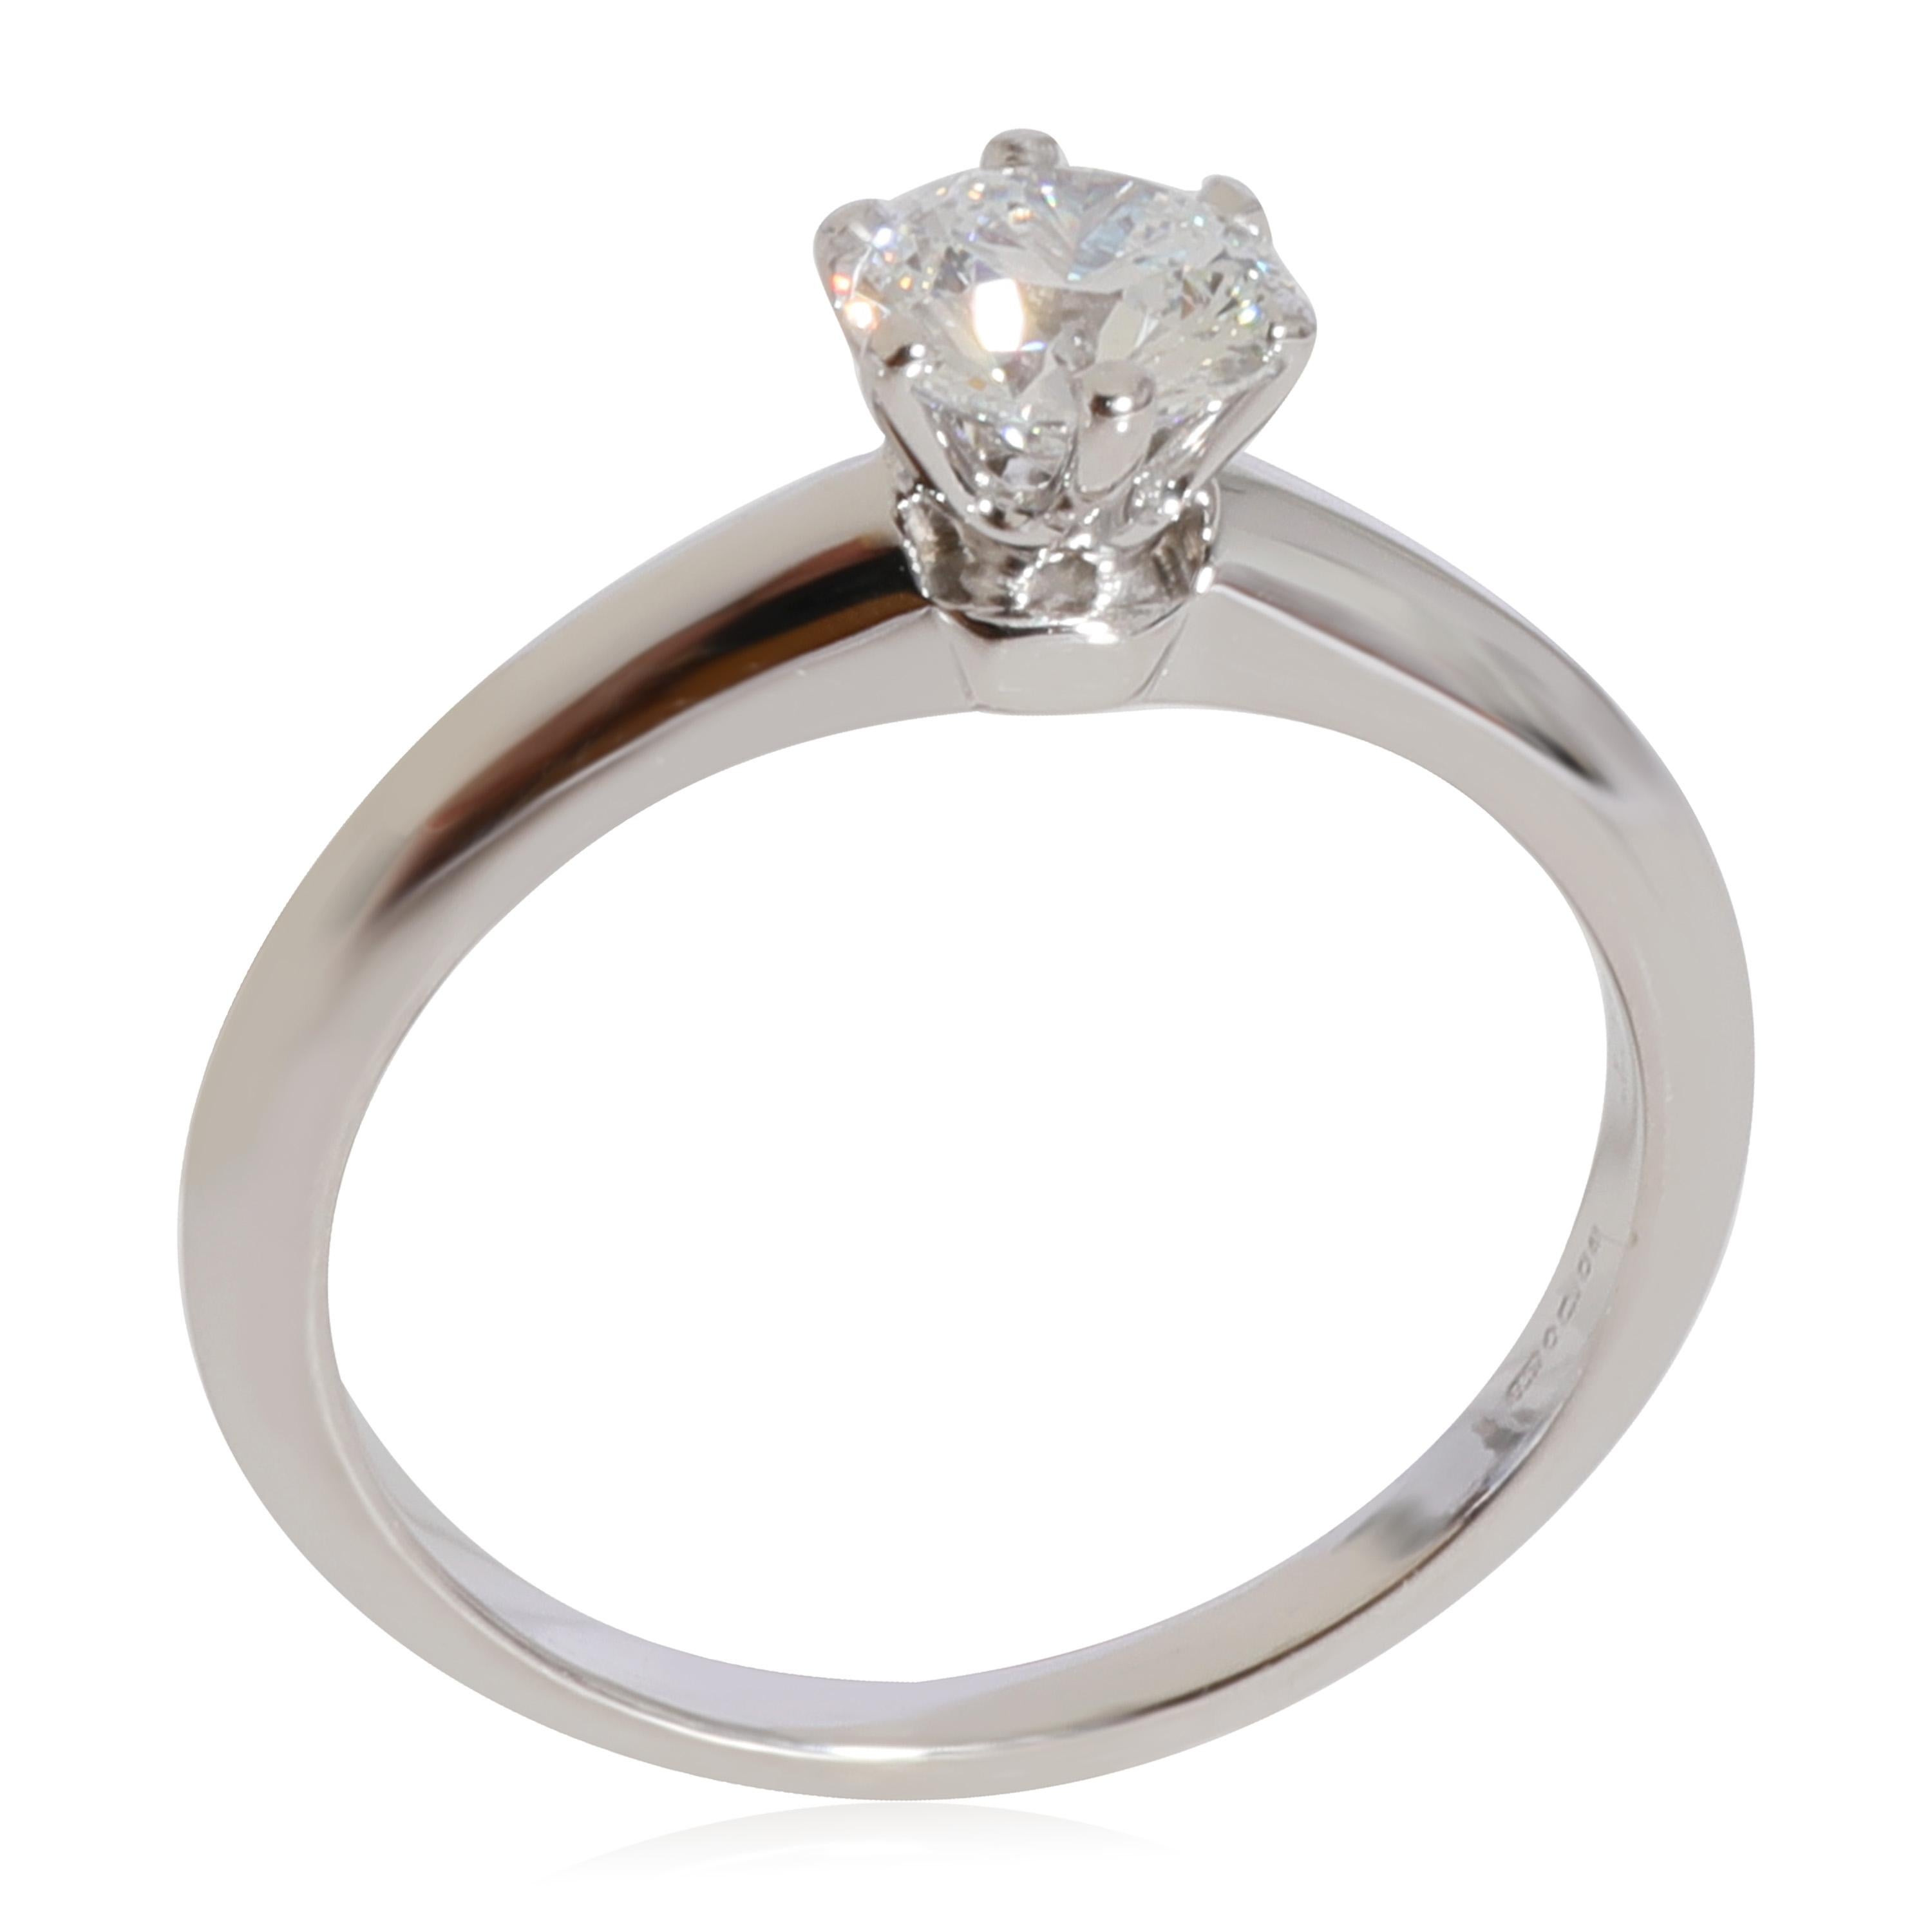 Tiffany & Co. Diamond Solitaire Ring in Platinum D VVS2

PRIMARY DETAILS
SKU: 124783
Listing Title: Tiffany & Co. Diamond Solitaire Ring in Platinum D VVS2
Condition Description: Retails for 8350 USD. In excellent condition and recently polished.